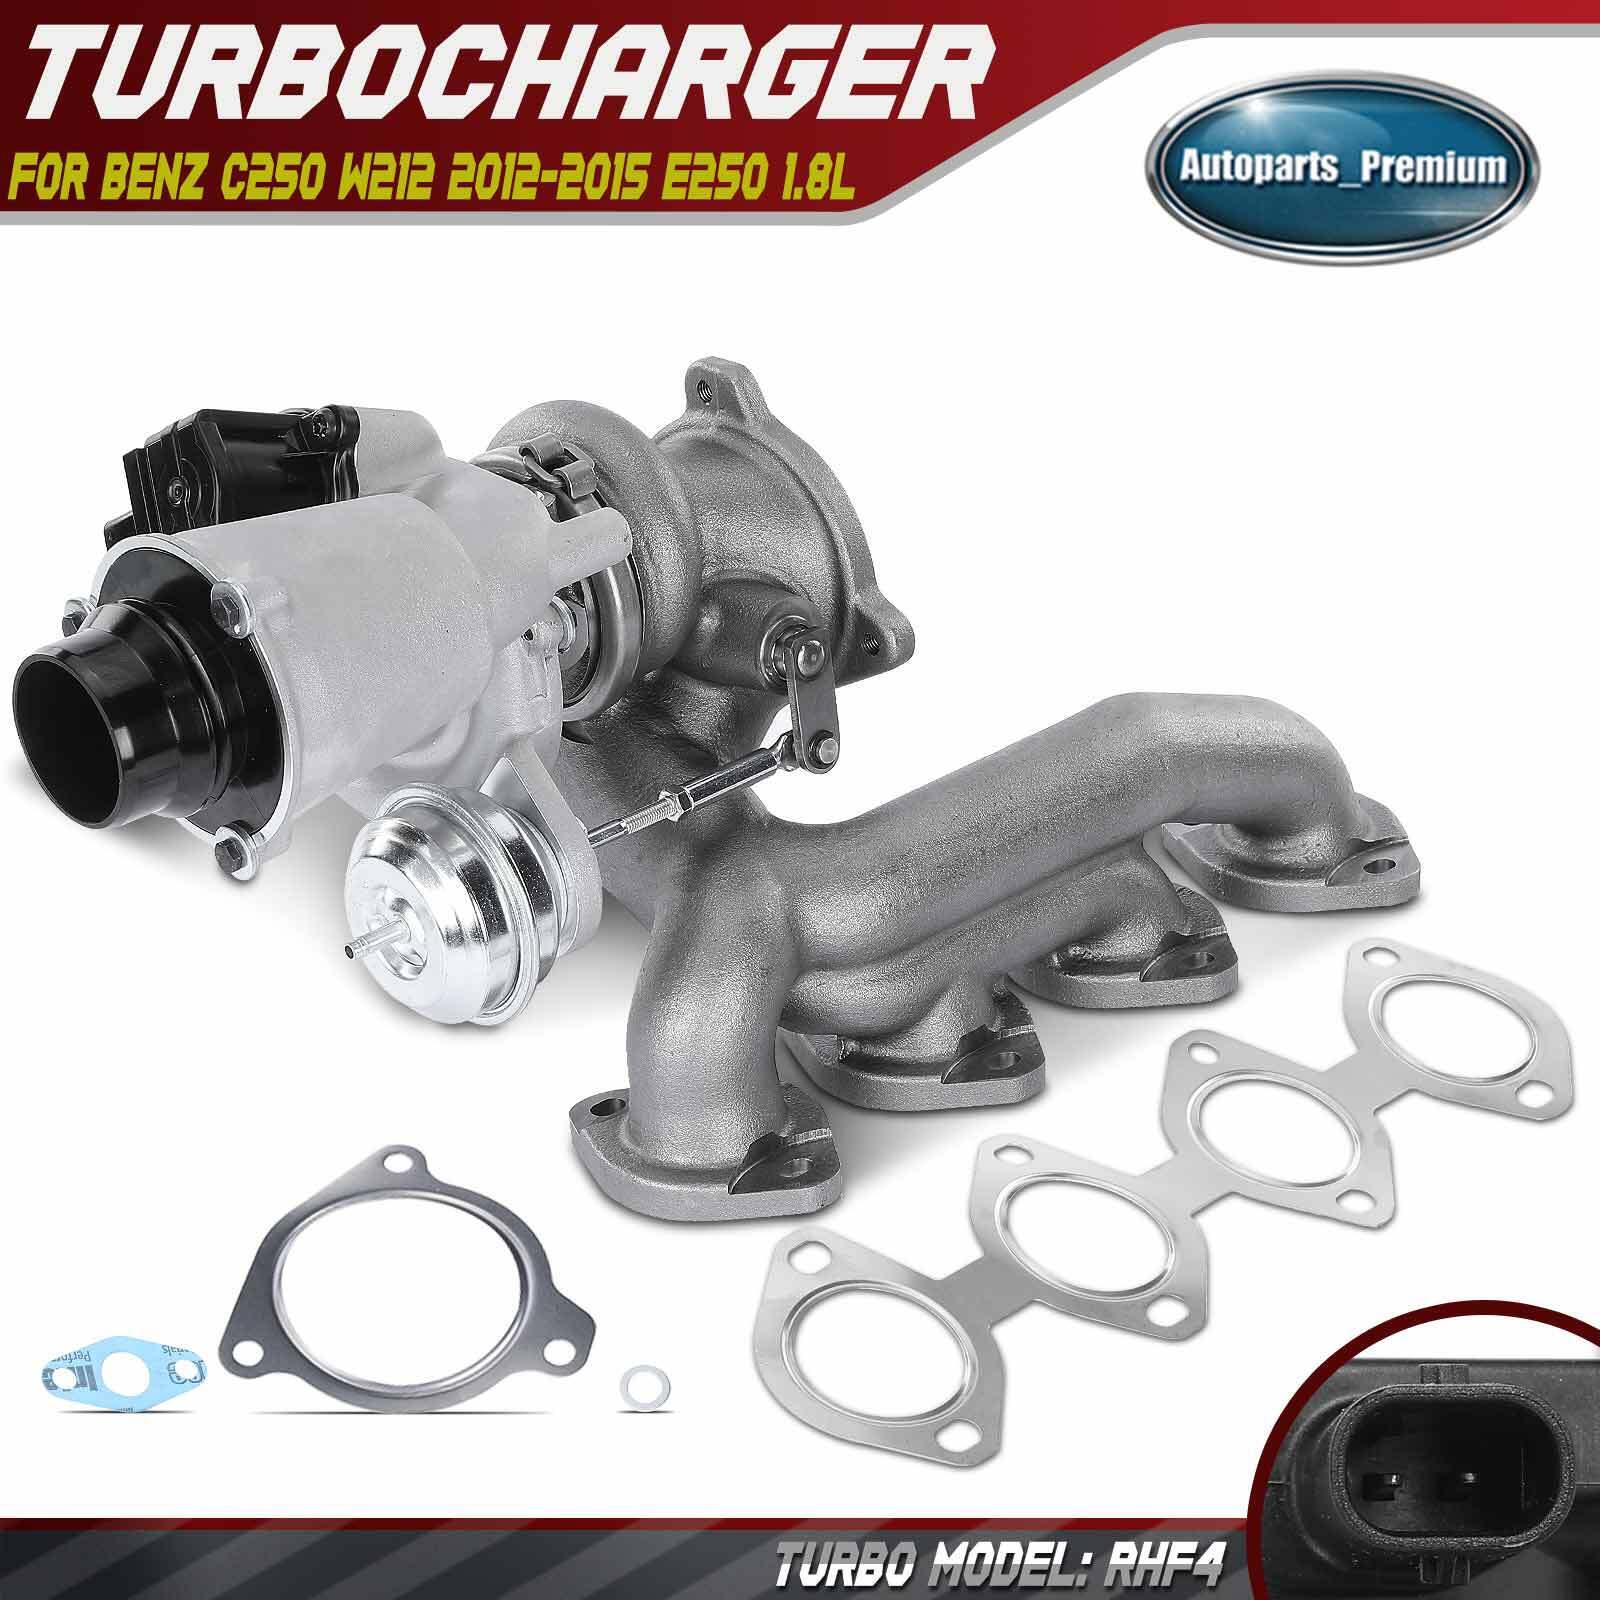 Turbo Turbocharger wIth Gasket for Mercedes-Benz C250 W212 2012-2015 E250 1.8L